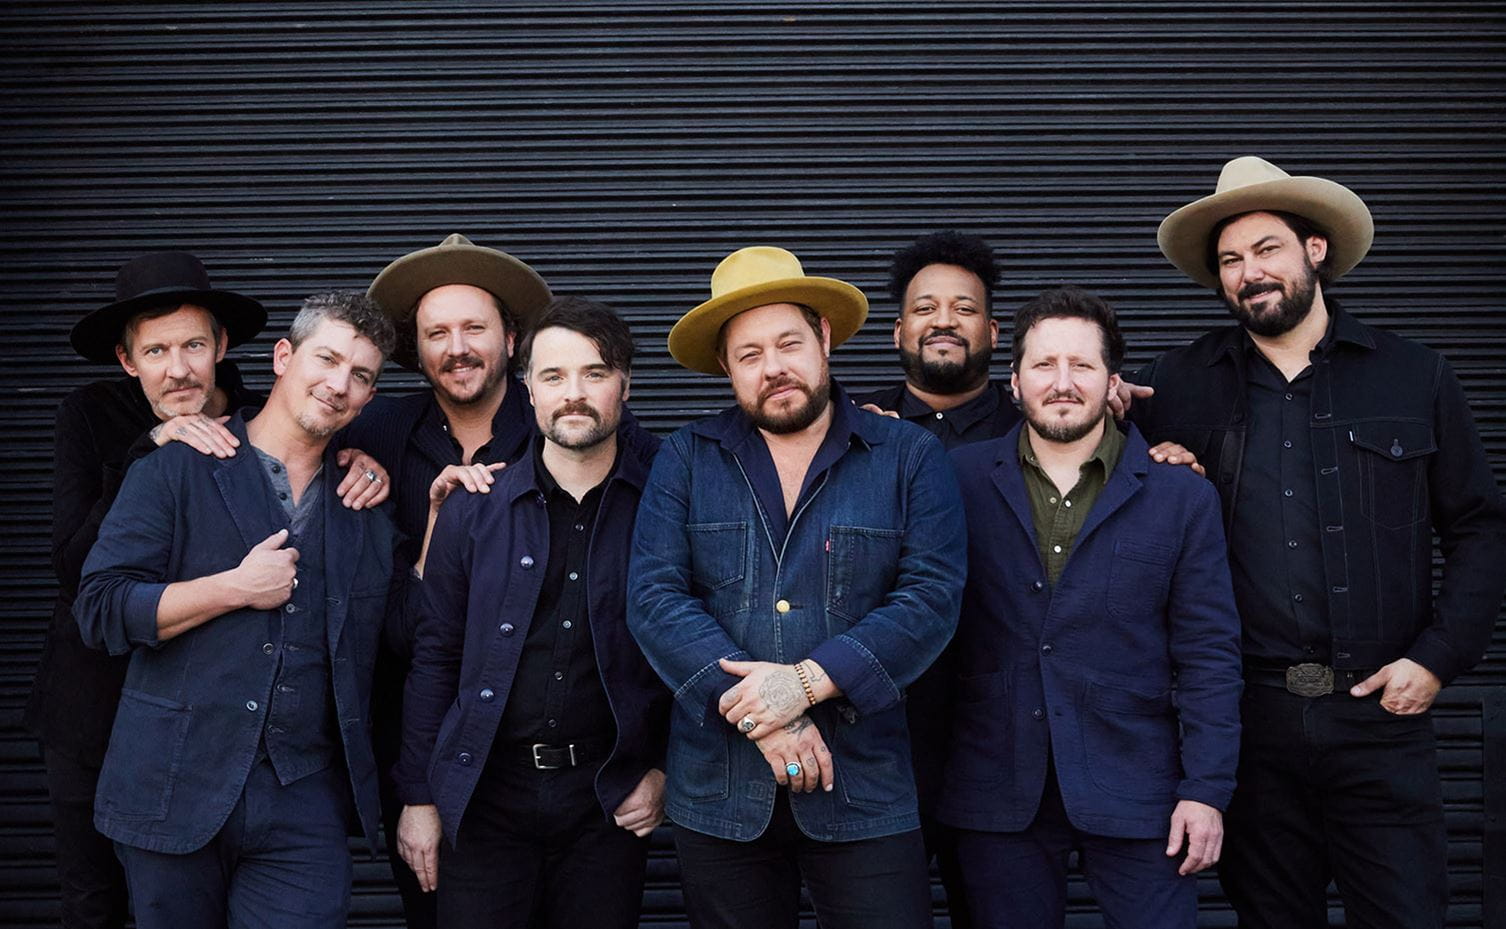 Nathaniel Rateliff & the Night Sweats set to perform at the Bud Light Hi-Fi Concert Series. 